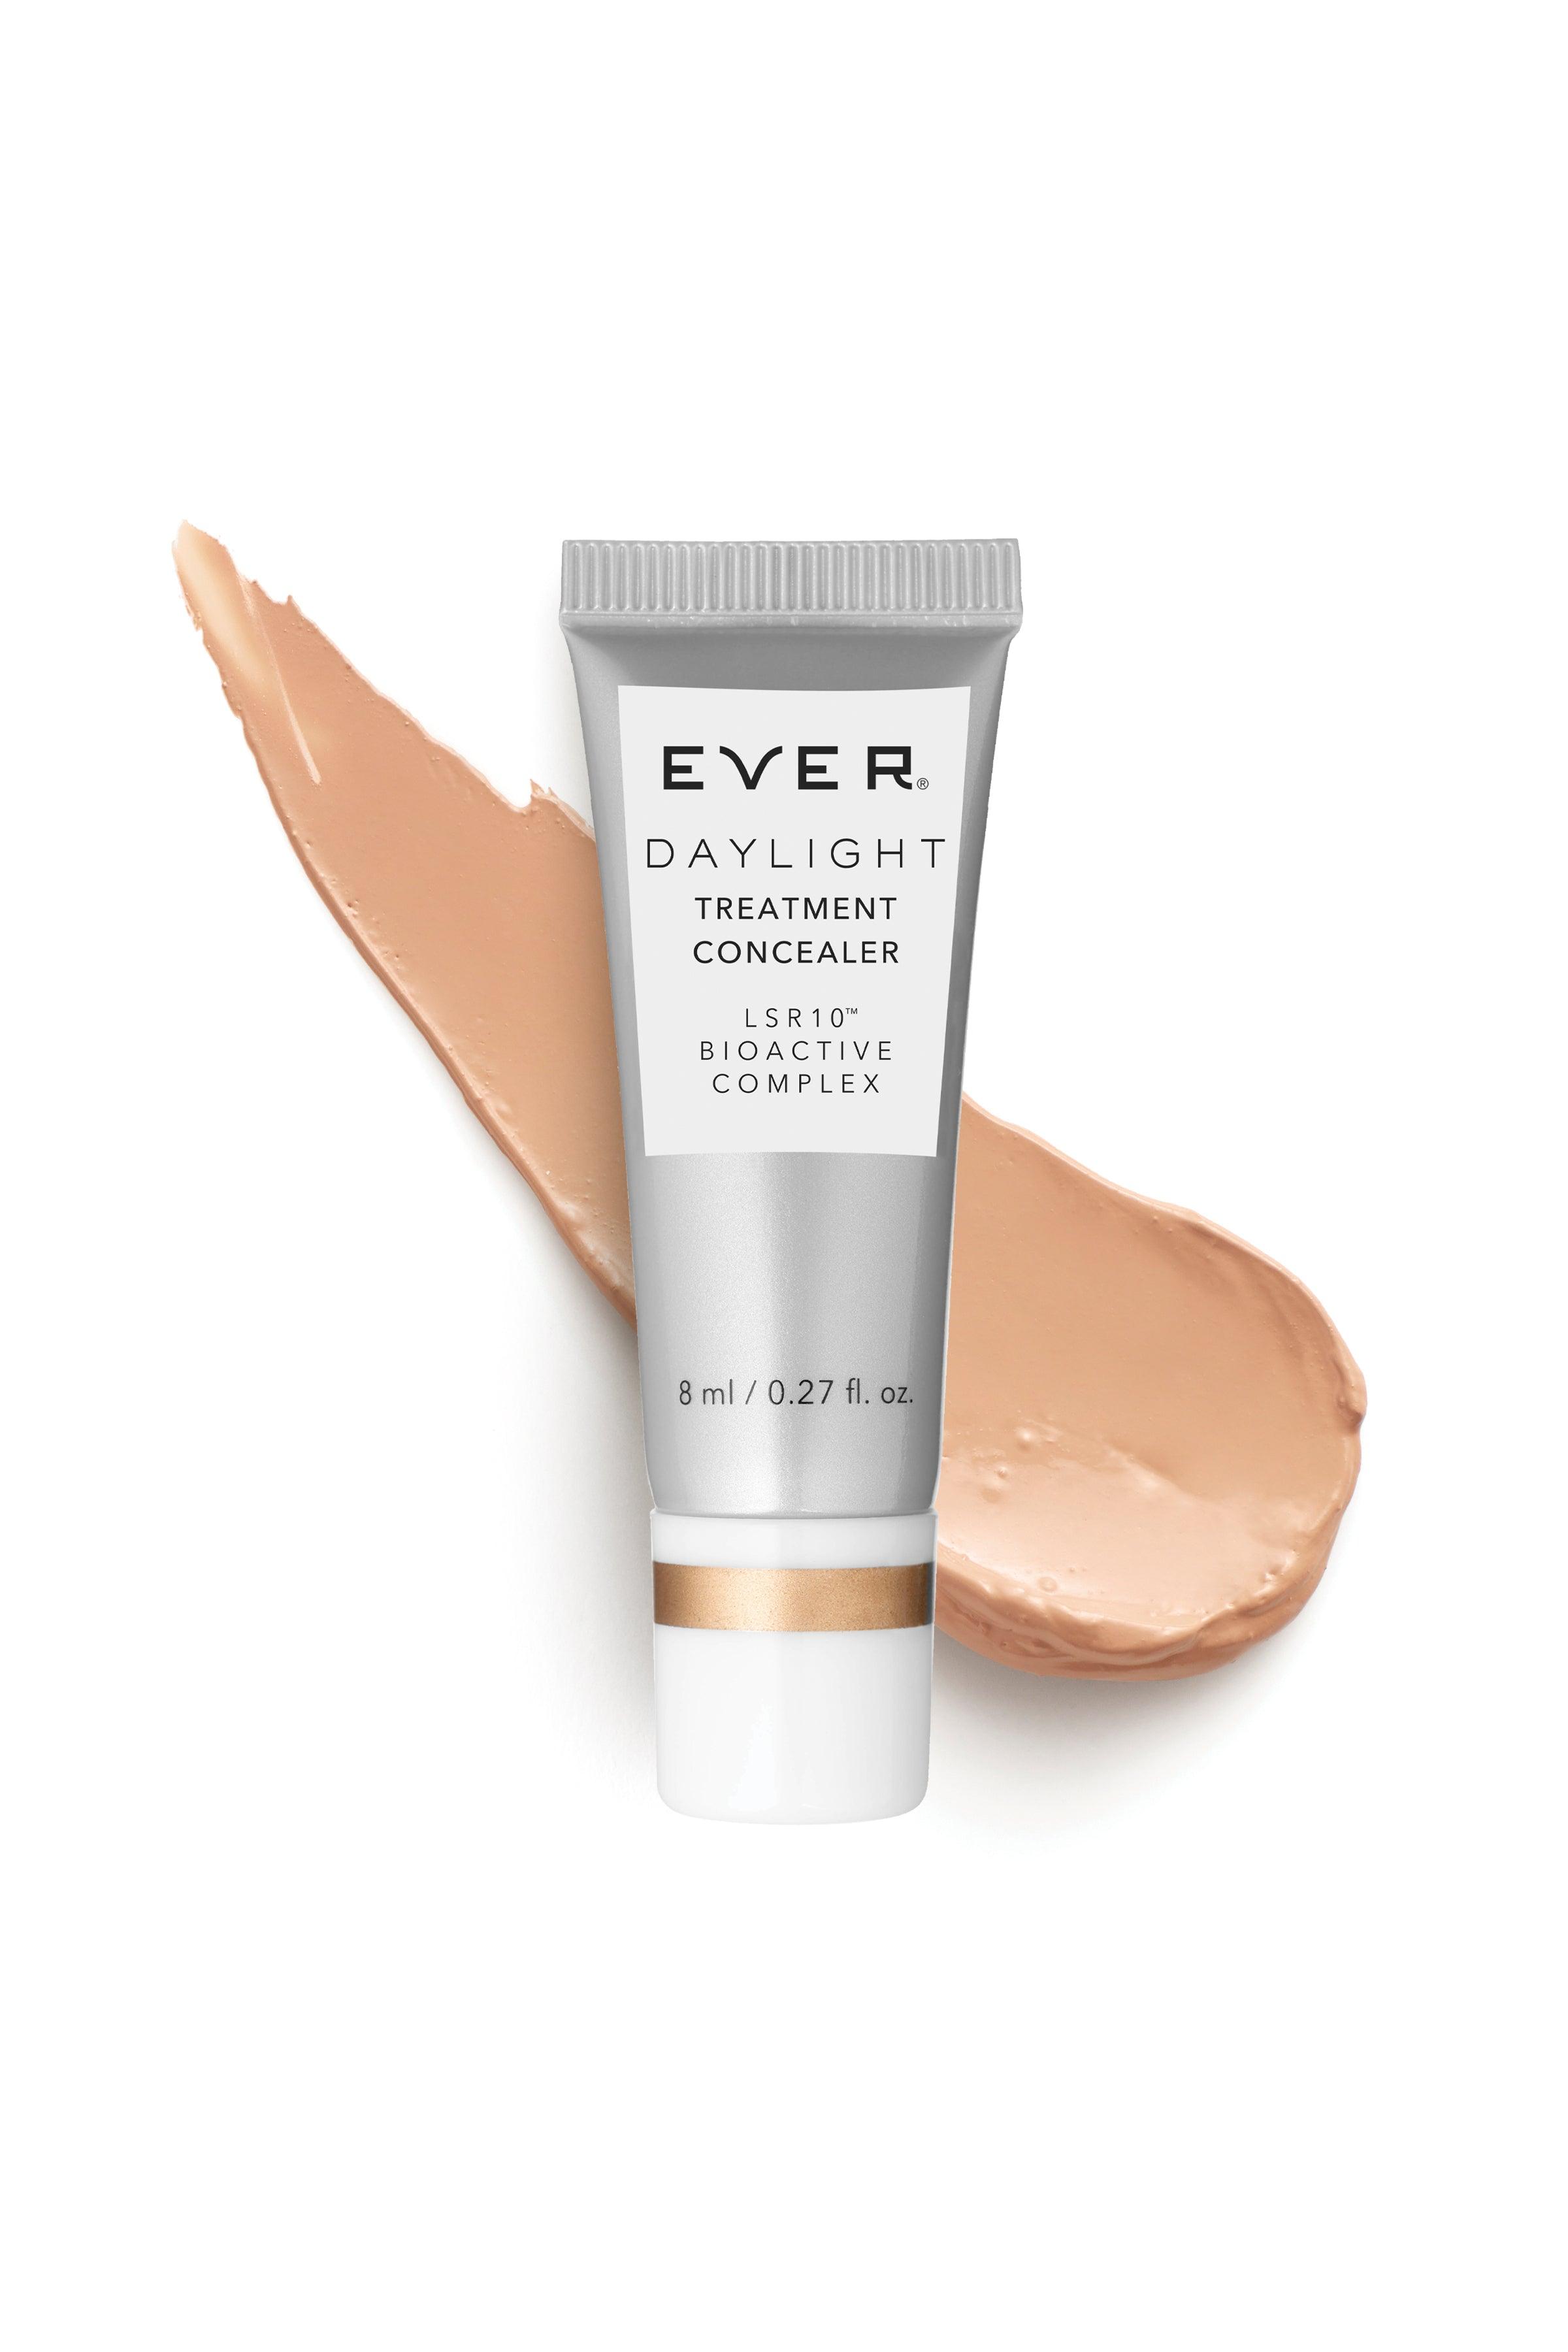 DAYLIGHT Treatment Concealer with LSR10® - EVER